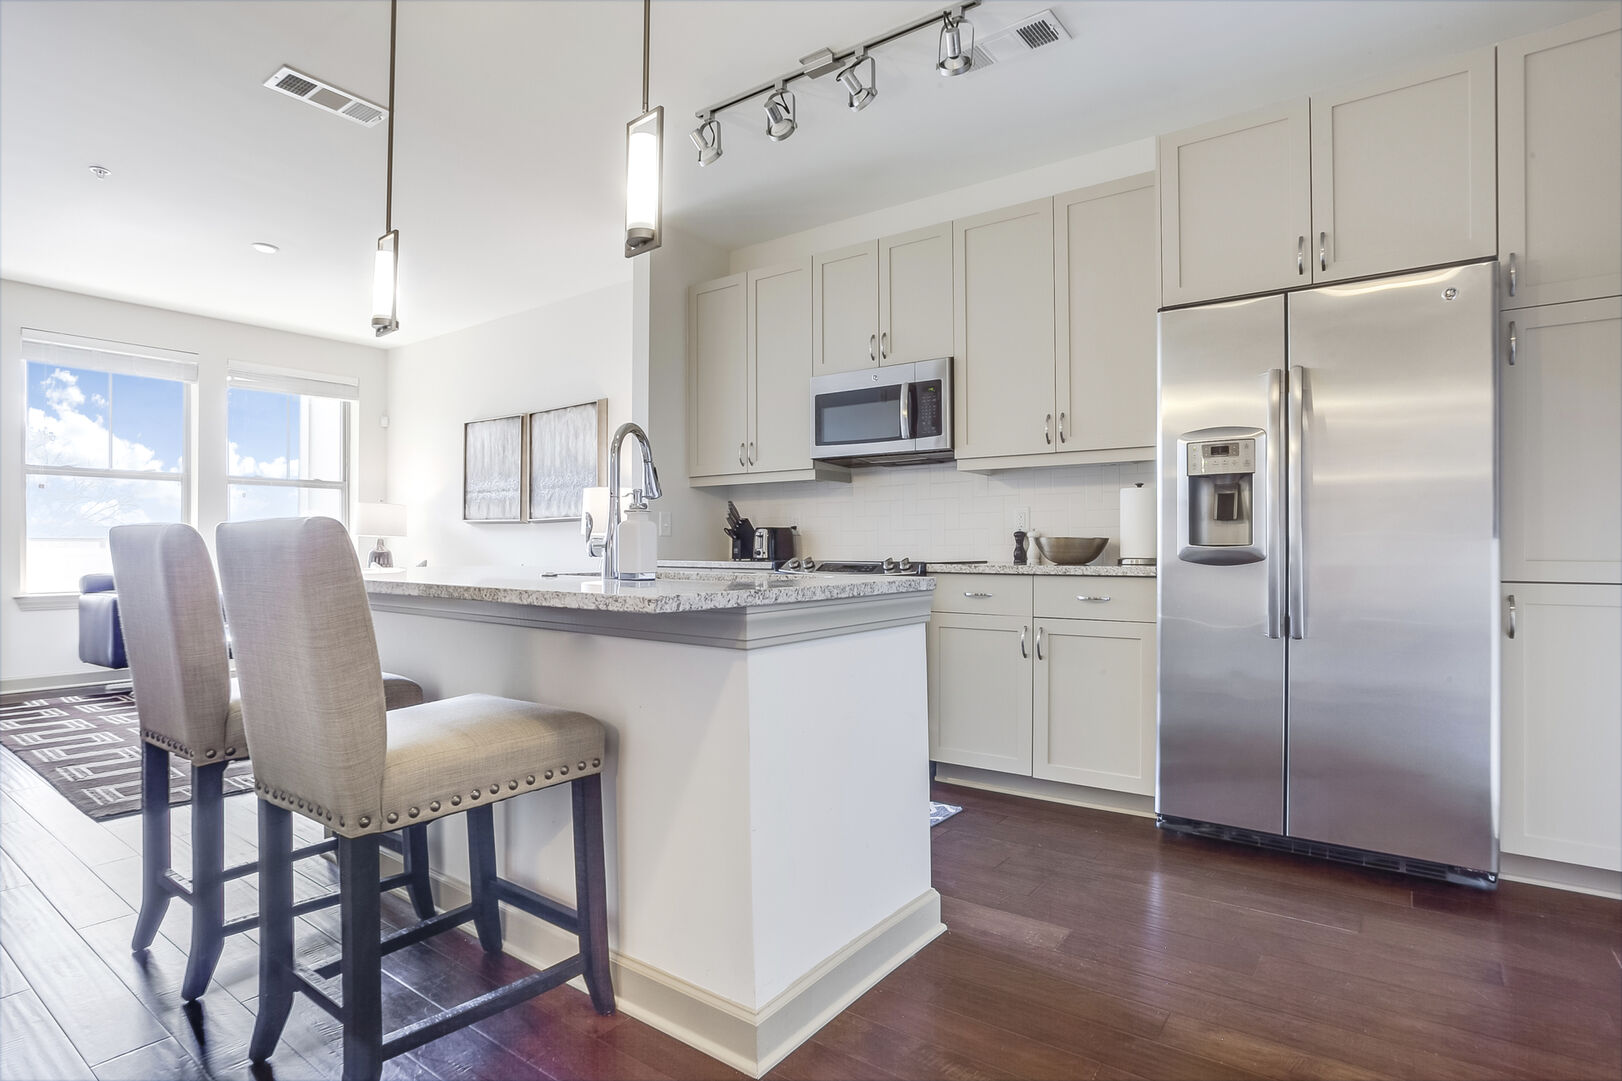 Fully equipped Kitchen with Breakfast Bar Seating for Two